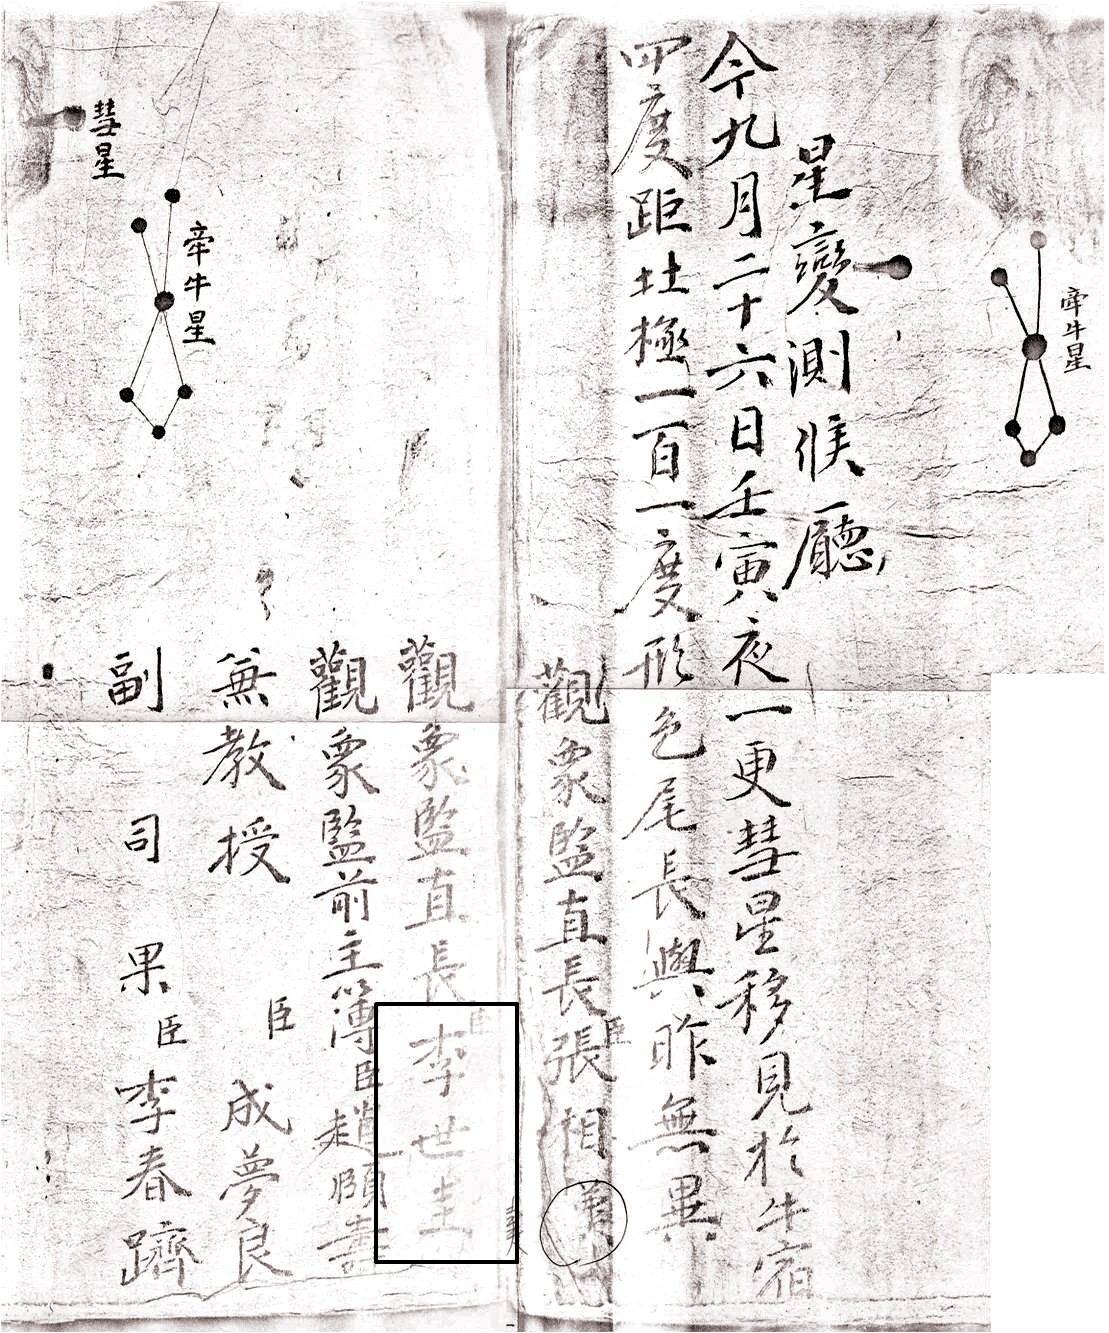 A comet record on the twenty sixth day of the ninth month of the 1723 SeongbyeonDeungrok. Yi Se-gyu’s name (李世圭) is seen barely in the second from right among five observers (Courtesy of Yonsei University Library).